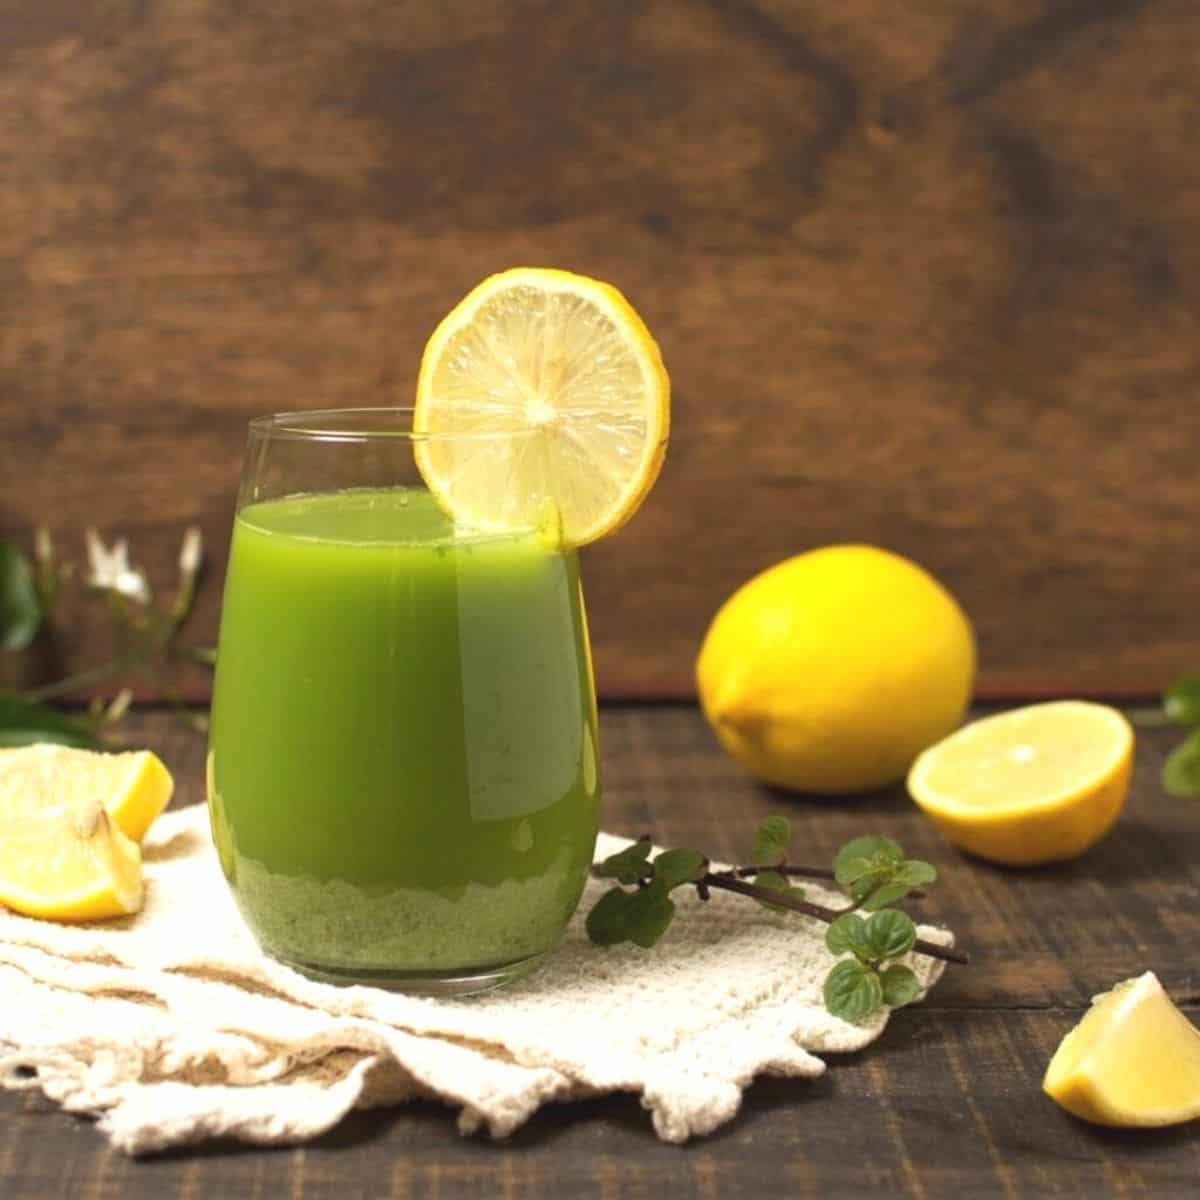 How to Make Green Juice Recipe for Glowing Skin